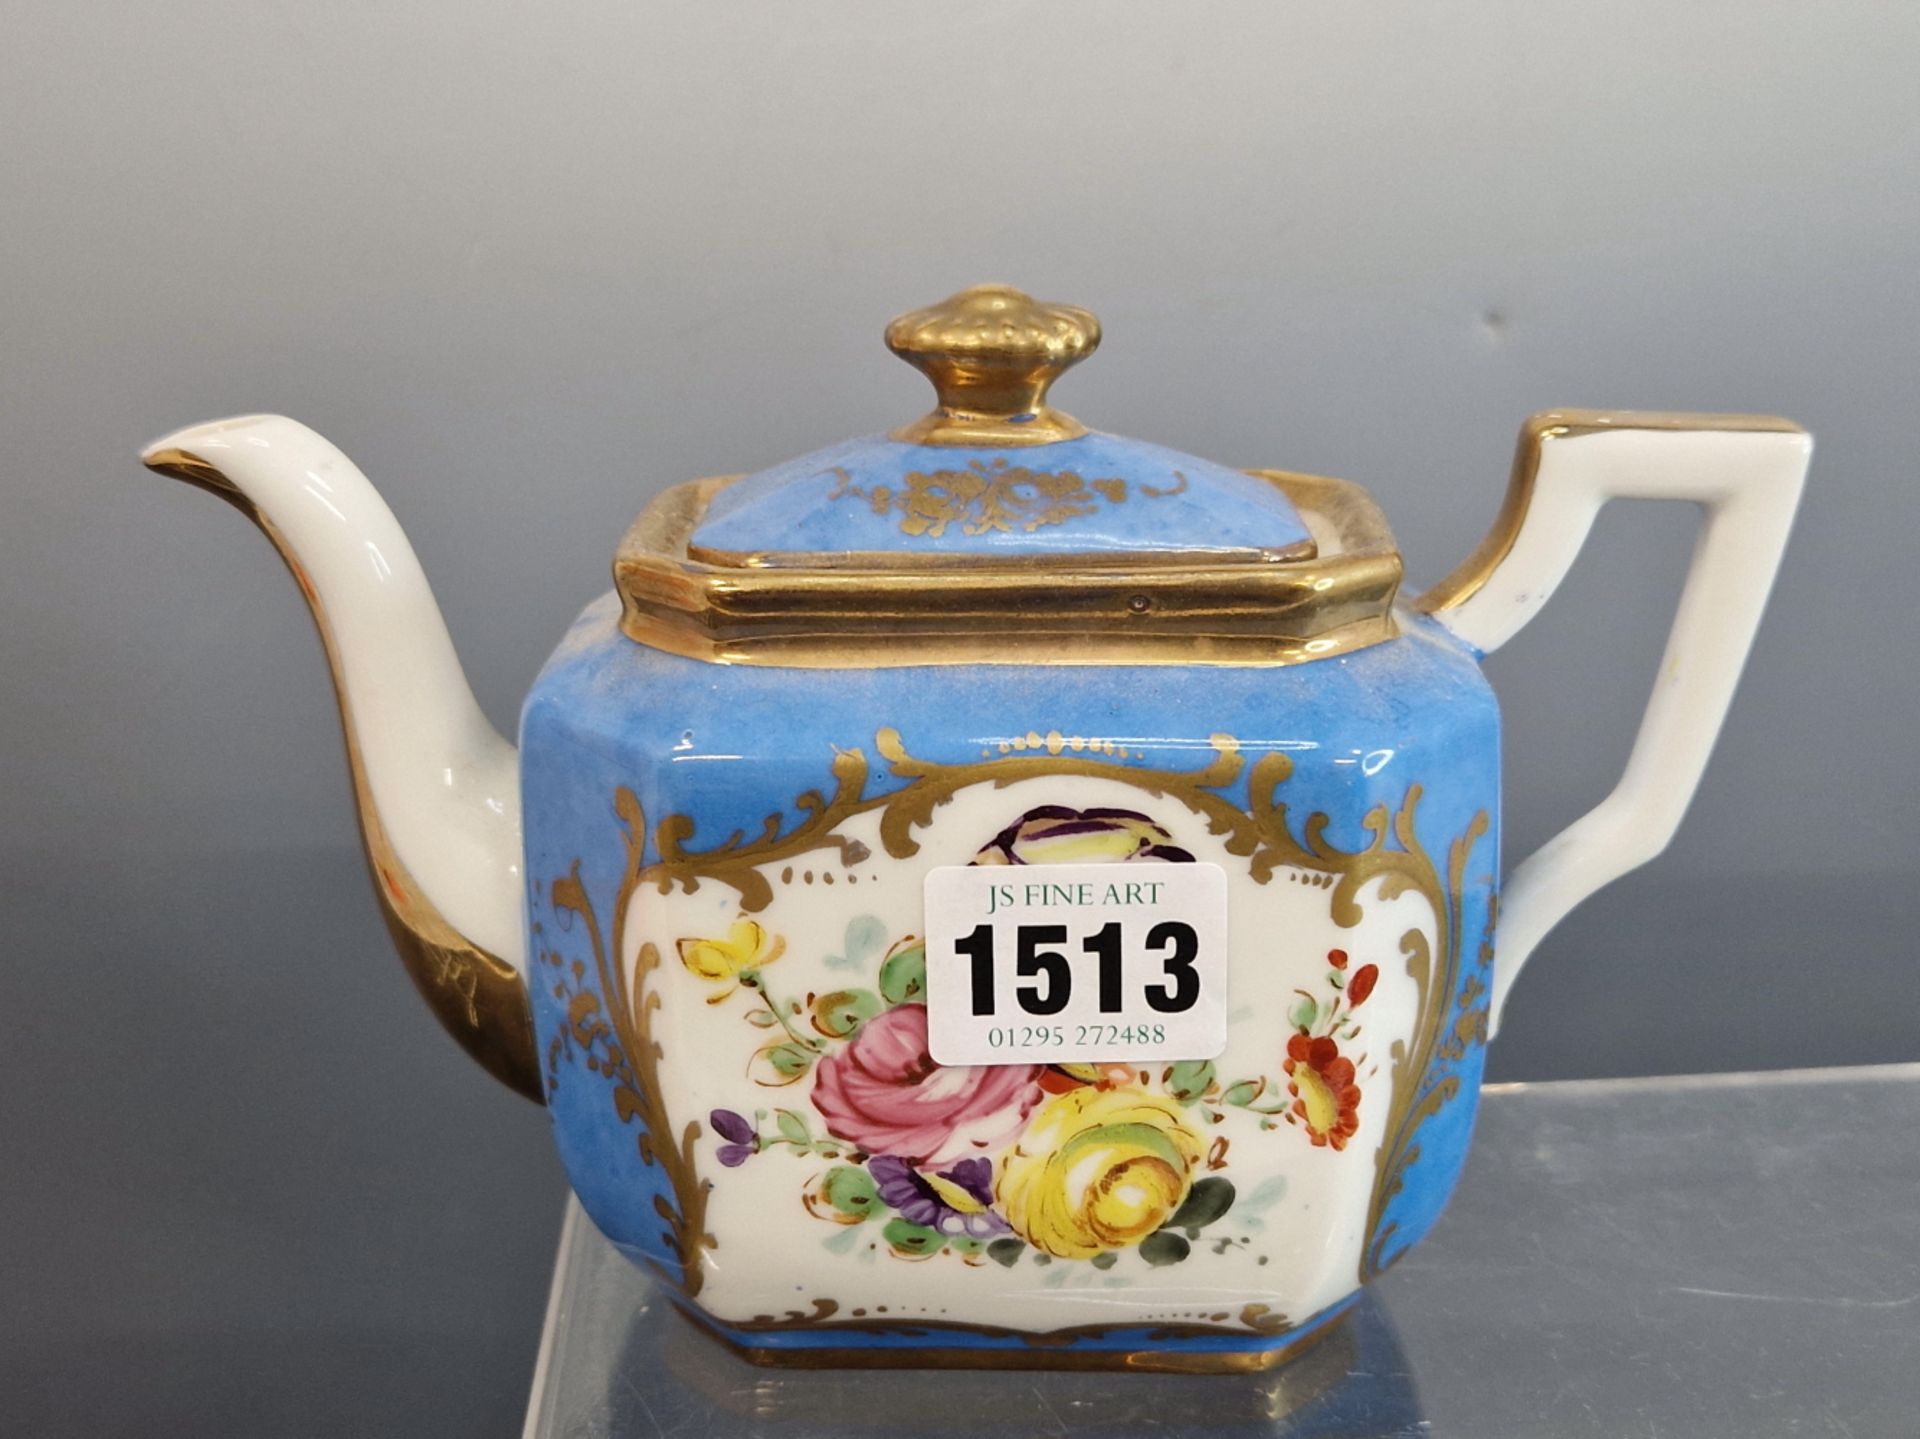 A PARIS PORCELAIN SEVRES STYLE BLUE GROUND FLOWER PAINTED TEA POT, COVER, CUP AND SAUCER - Image 2 of 12